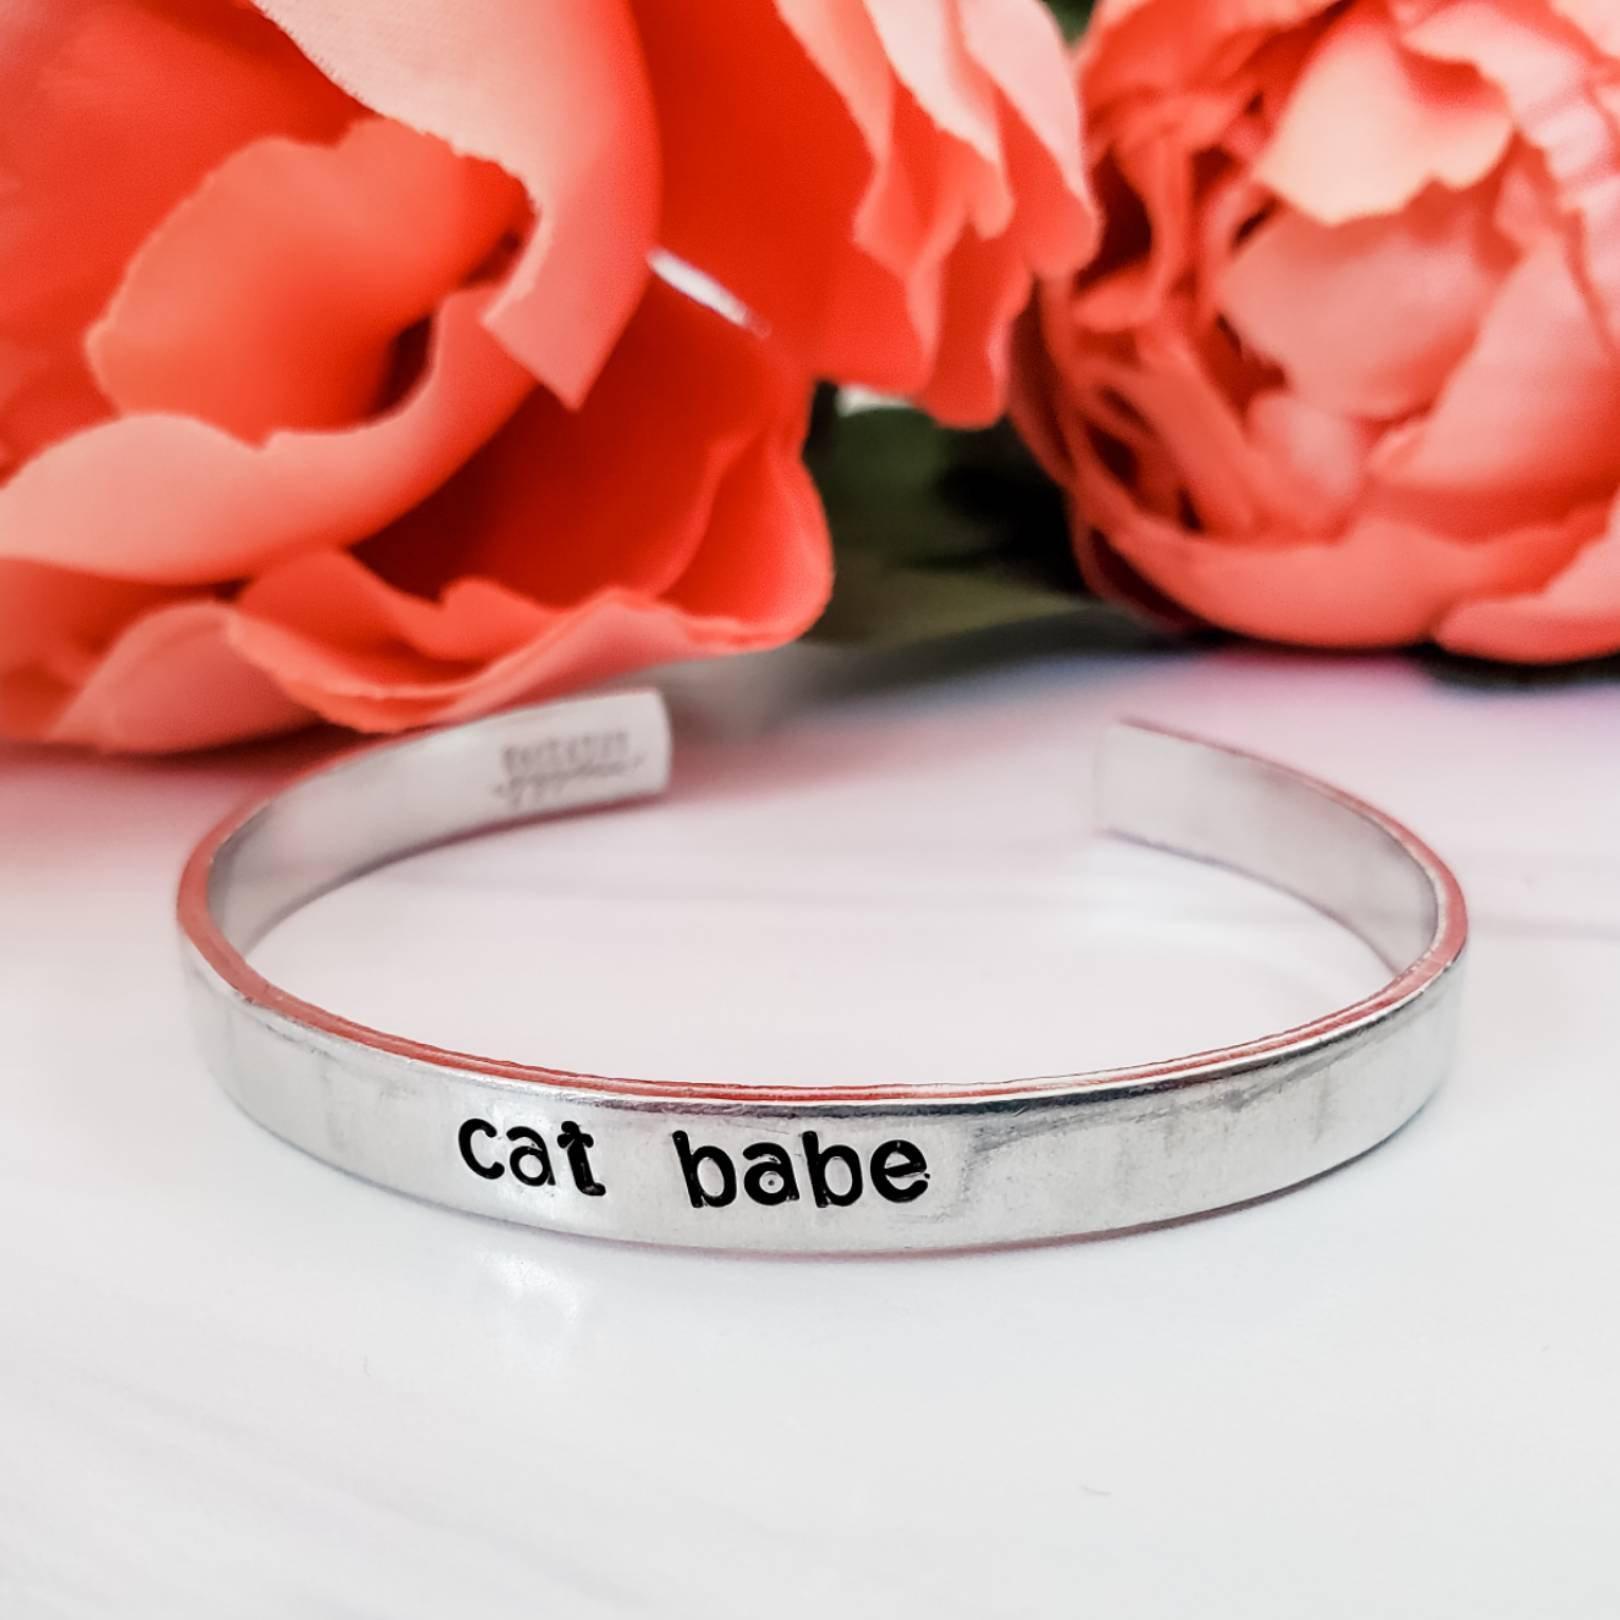 CAT BABE Stacking Cuff Bracelet Salt and Sparkle